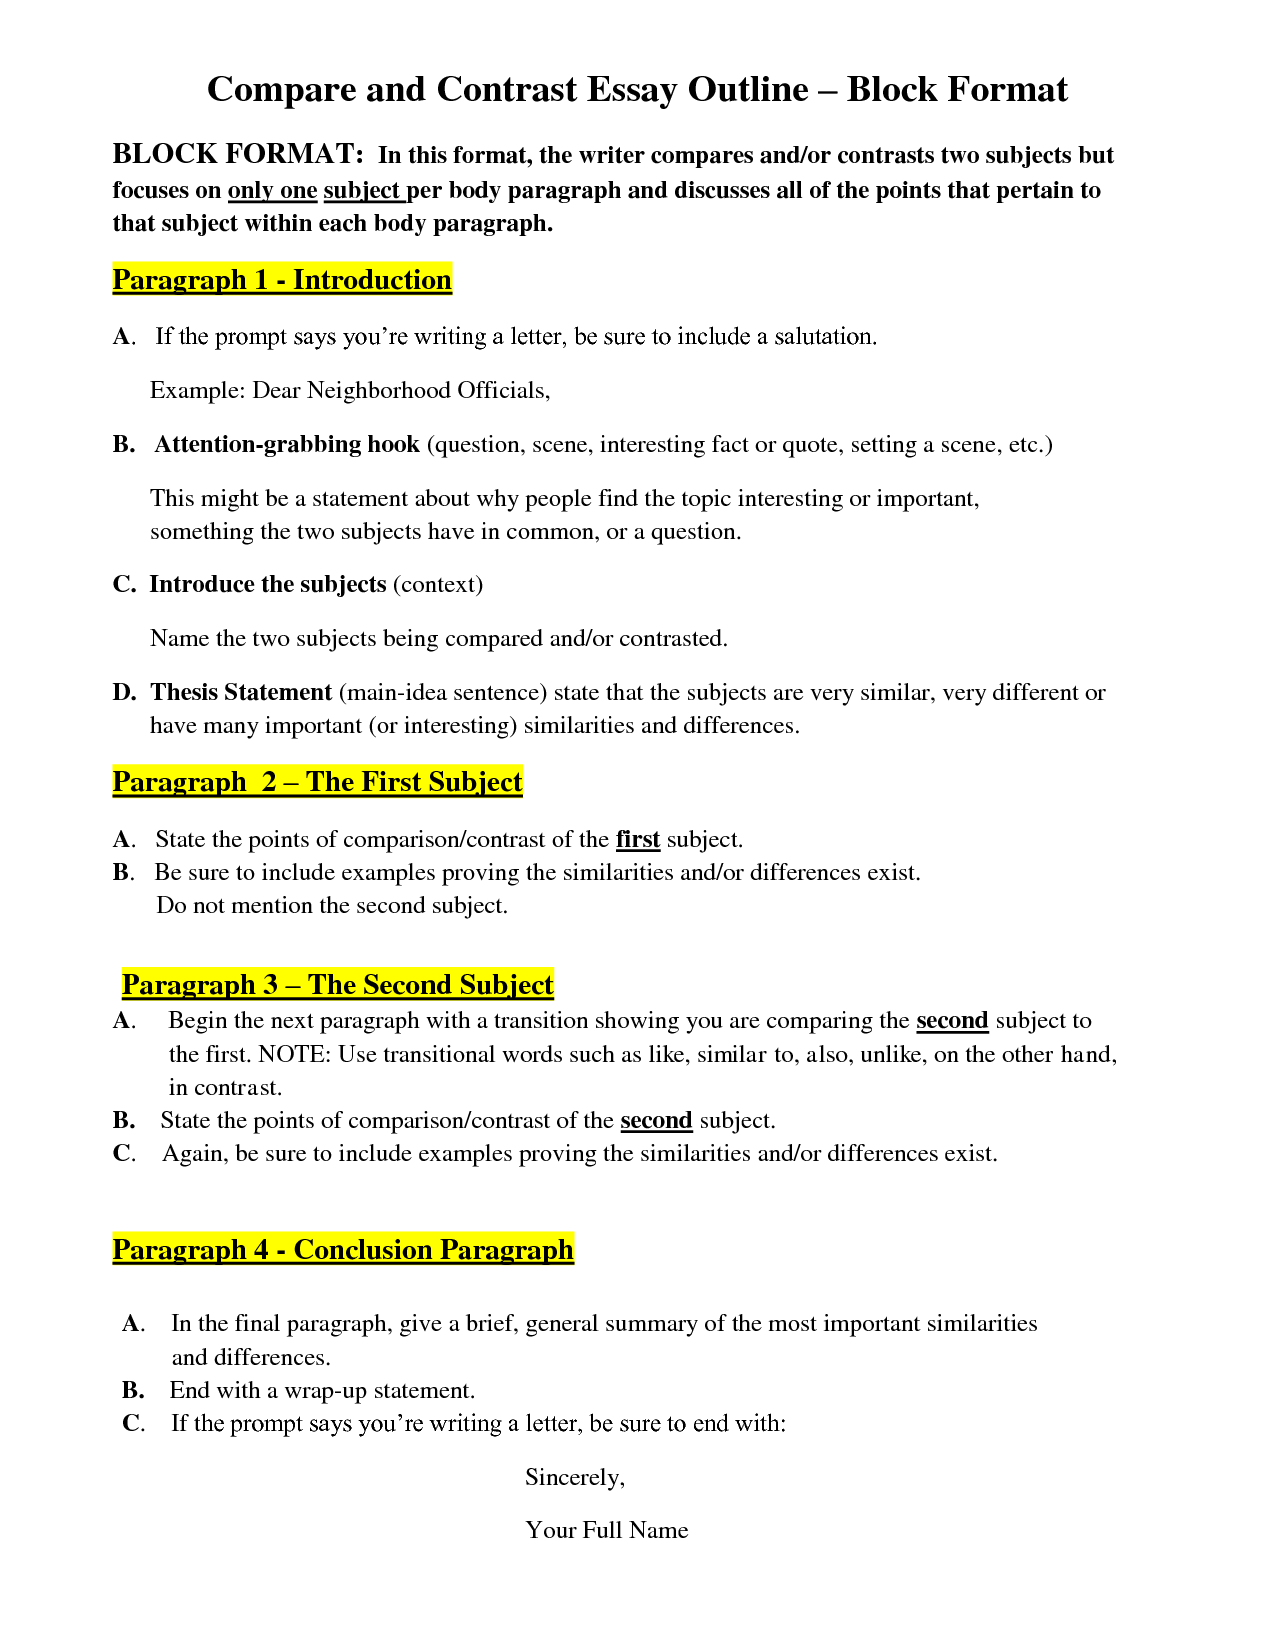 how to make an outline for compare and contrast essay